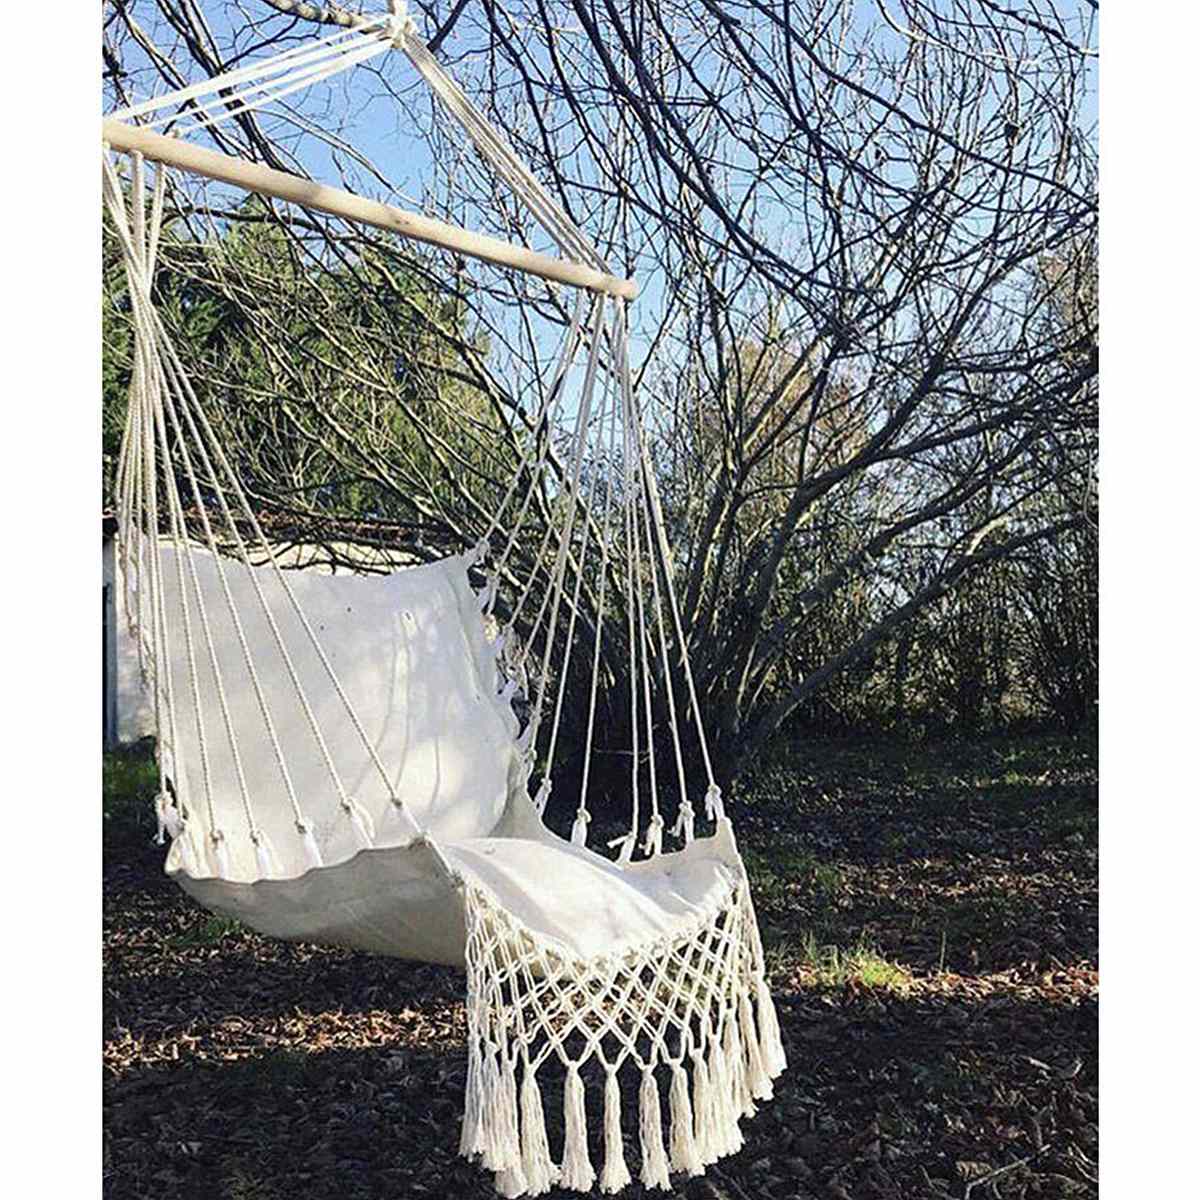 Tassel Garden Hammock Hang Rope Lazy Chair Swinging Outdoor Indoor Furniture Hanging Rope Chair Swing Chair Seat bed Camping